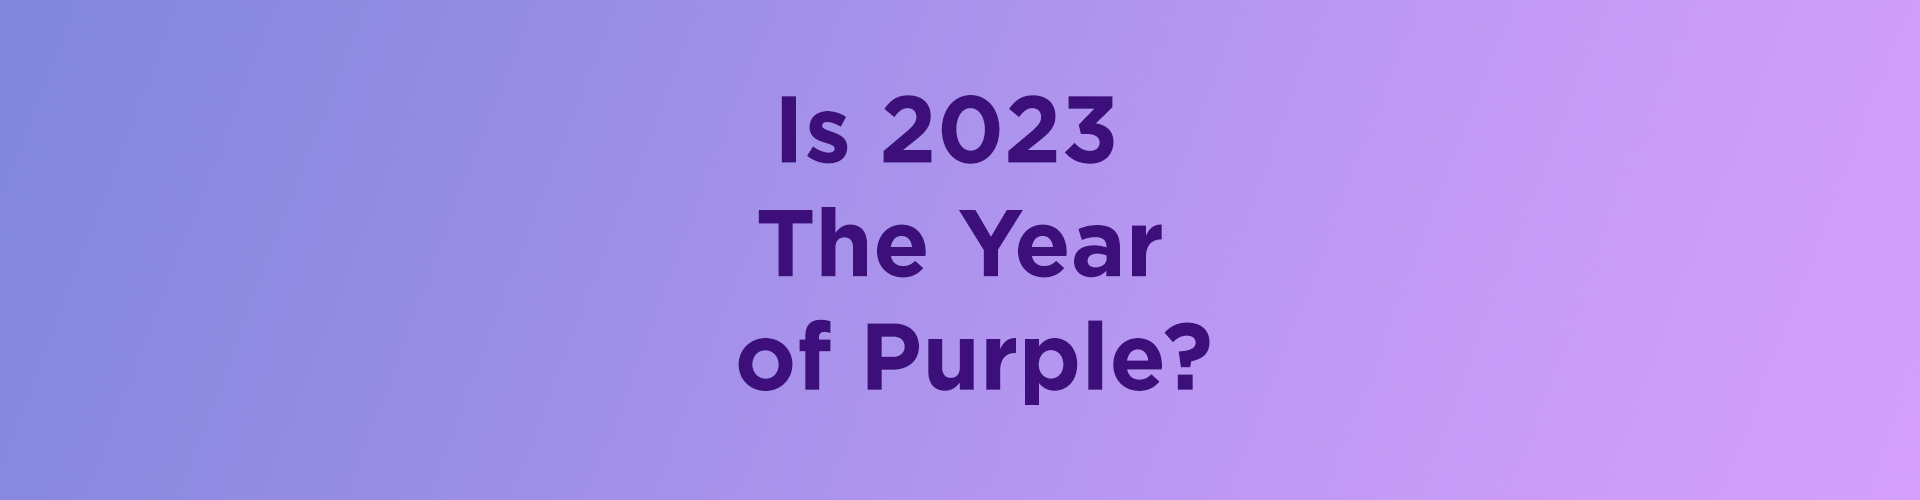 Is 2023 The Year of Purple?